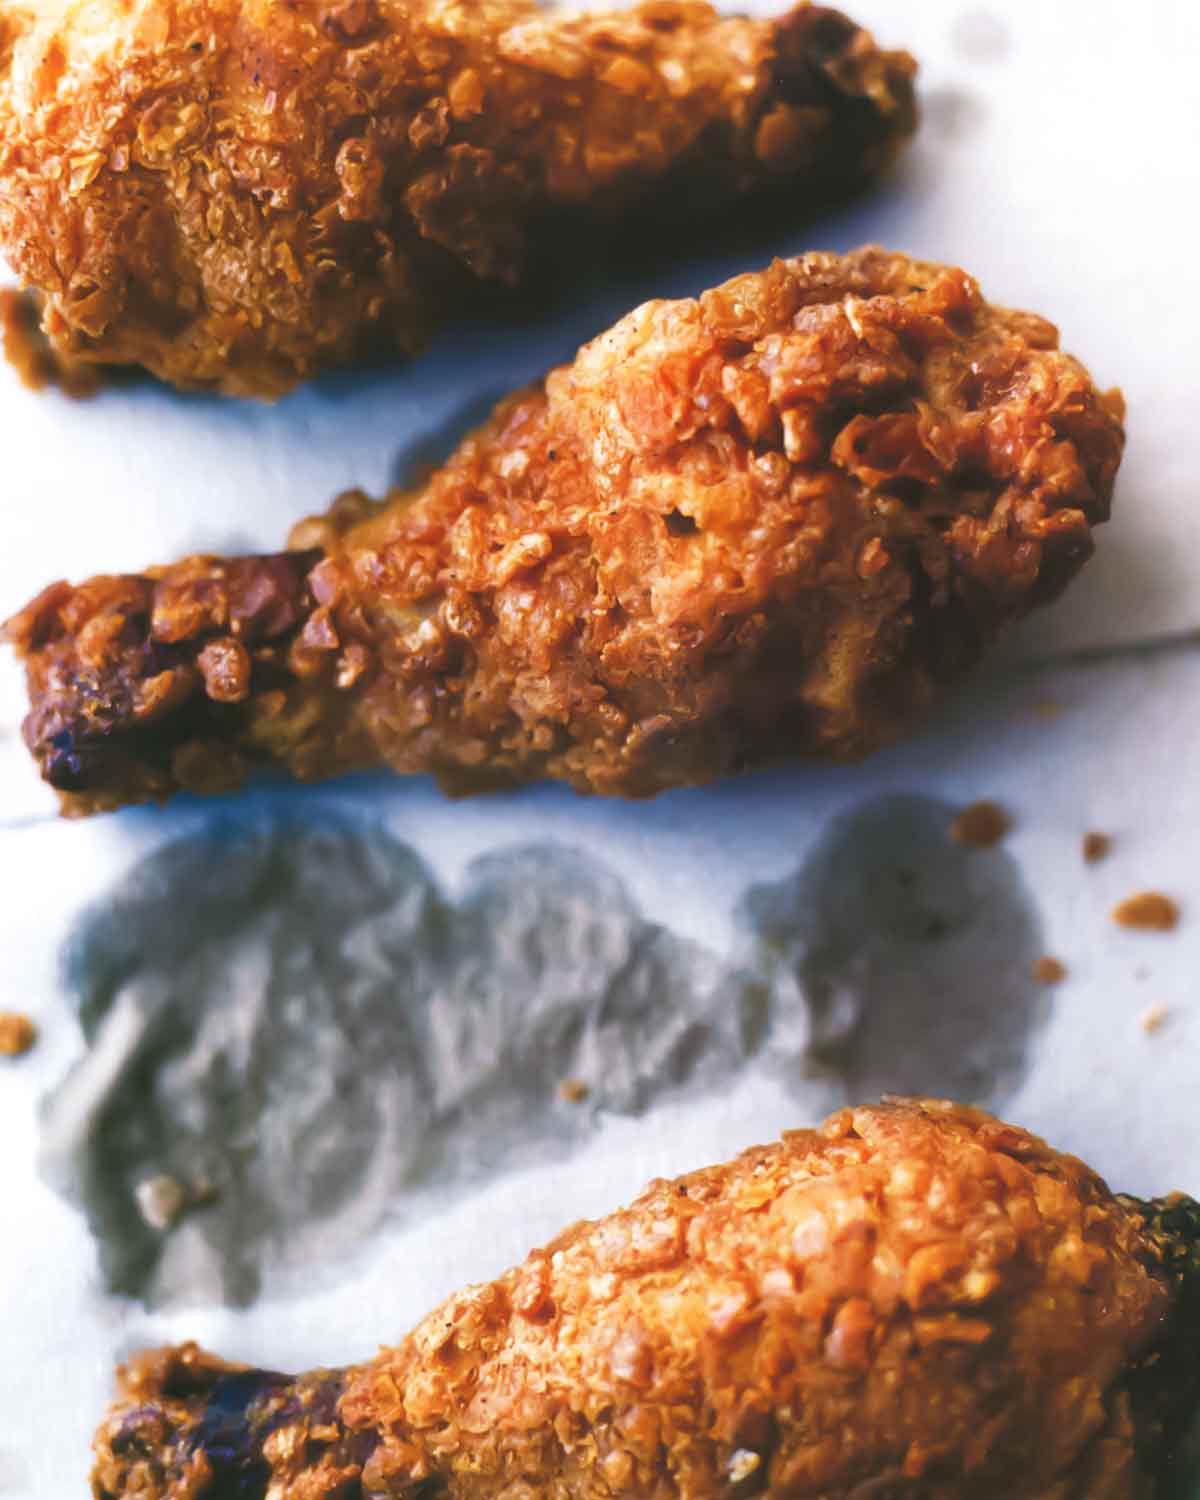 Three pieces of crispy fried chicken on grease-stained paper.